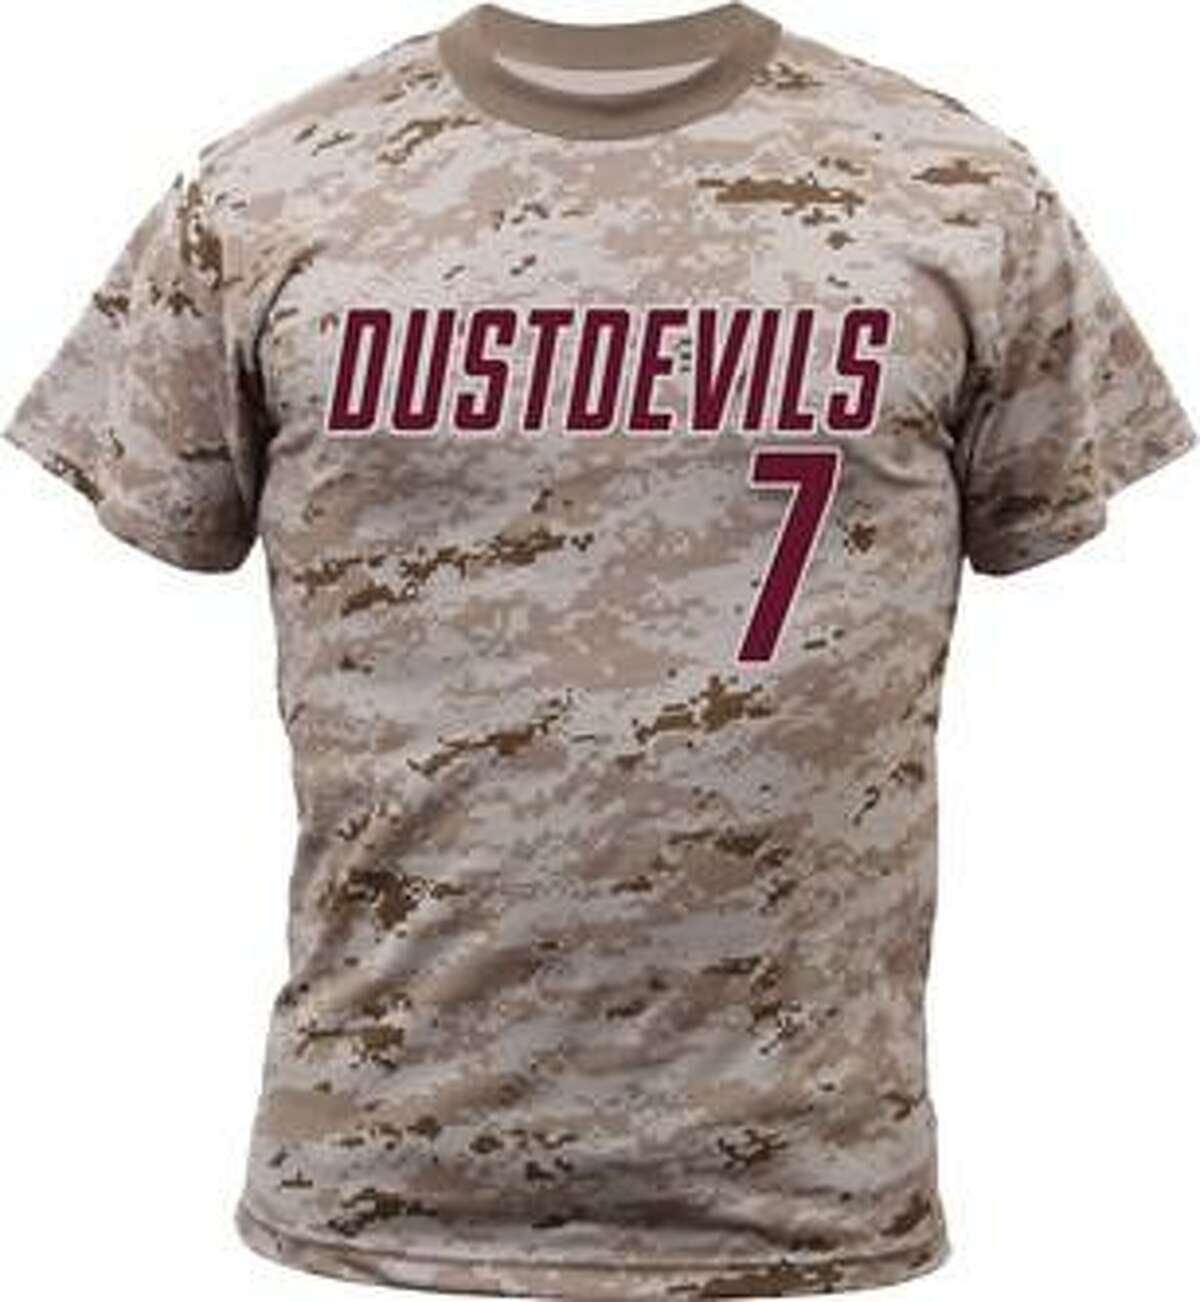 TAMIU will wear special jerseys for its military appreciation game against St. Edward's at 3 p.m. Saturday at Uni-Trade Stadium. Replica jersey T-shirts will be available for $25 with proceeds benefiting the TAMIU Student Veterans Association.